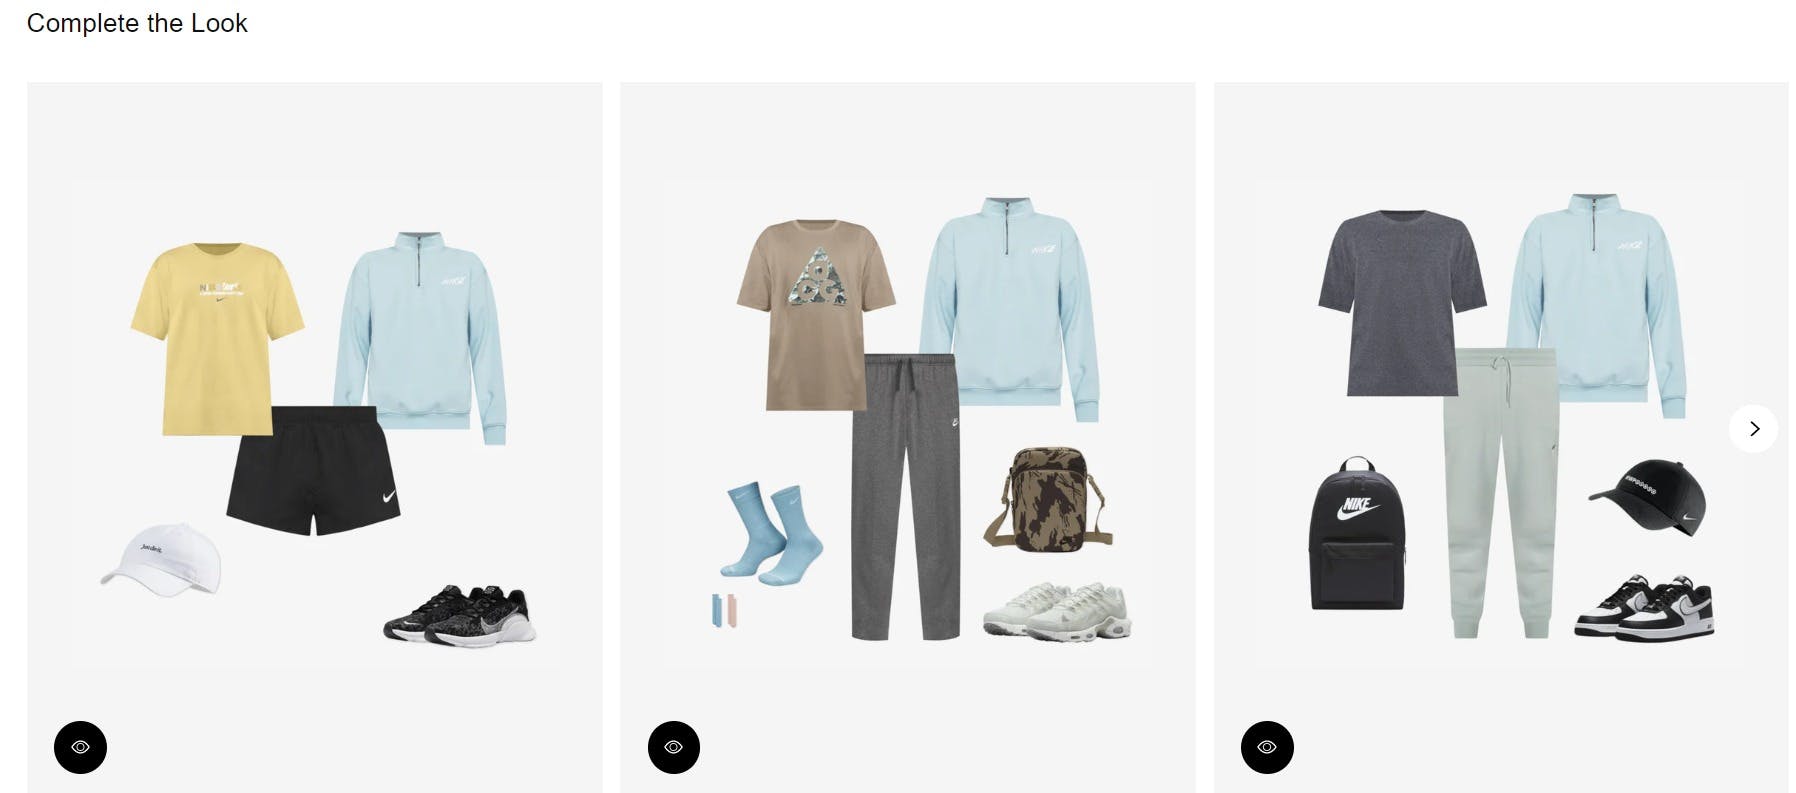 Nike's complete the look recommender